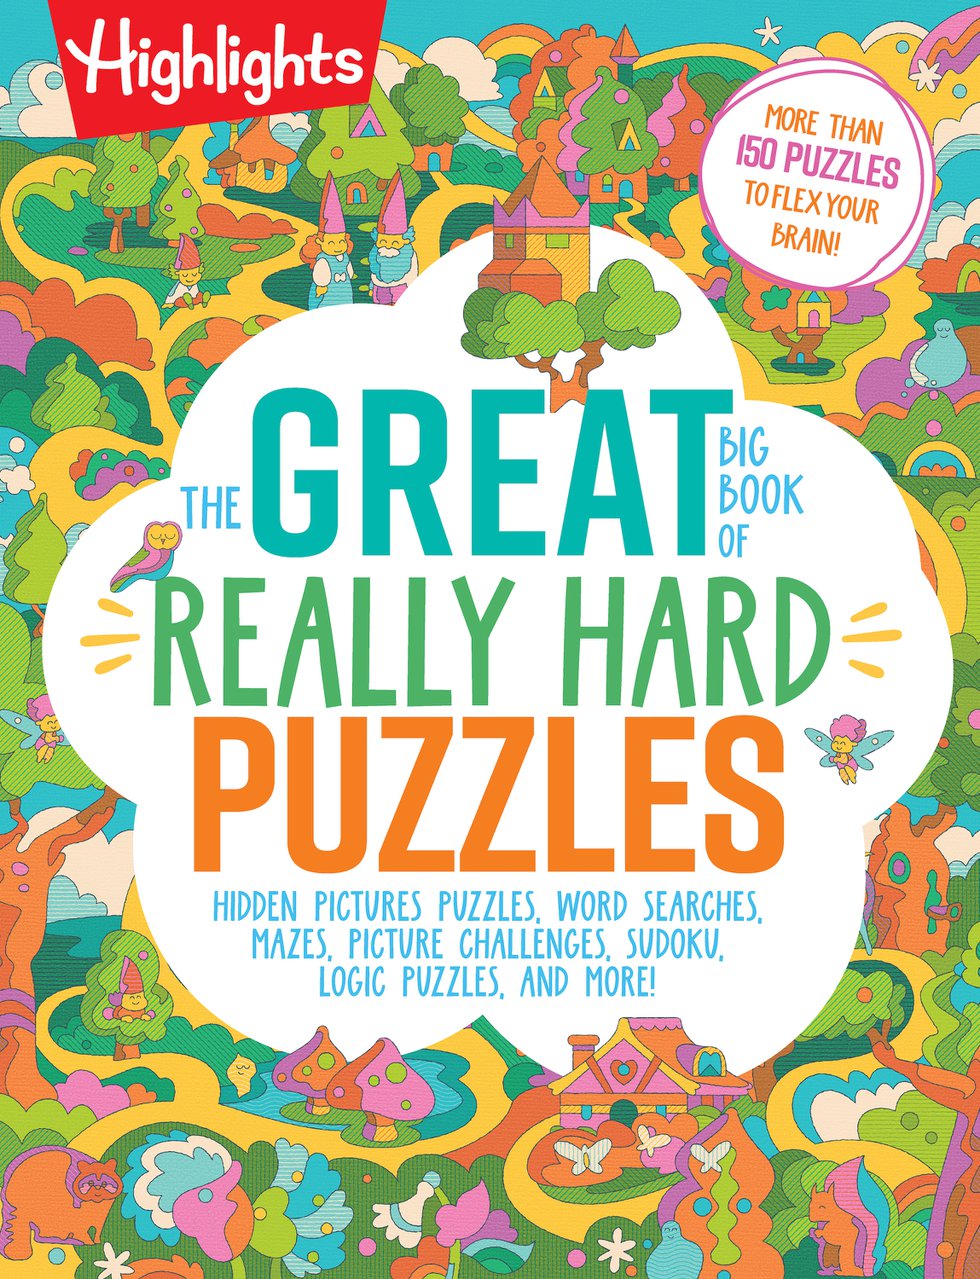 The Great Big Book of Really Hard Puzzles.jpg